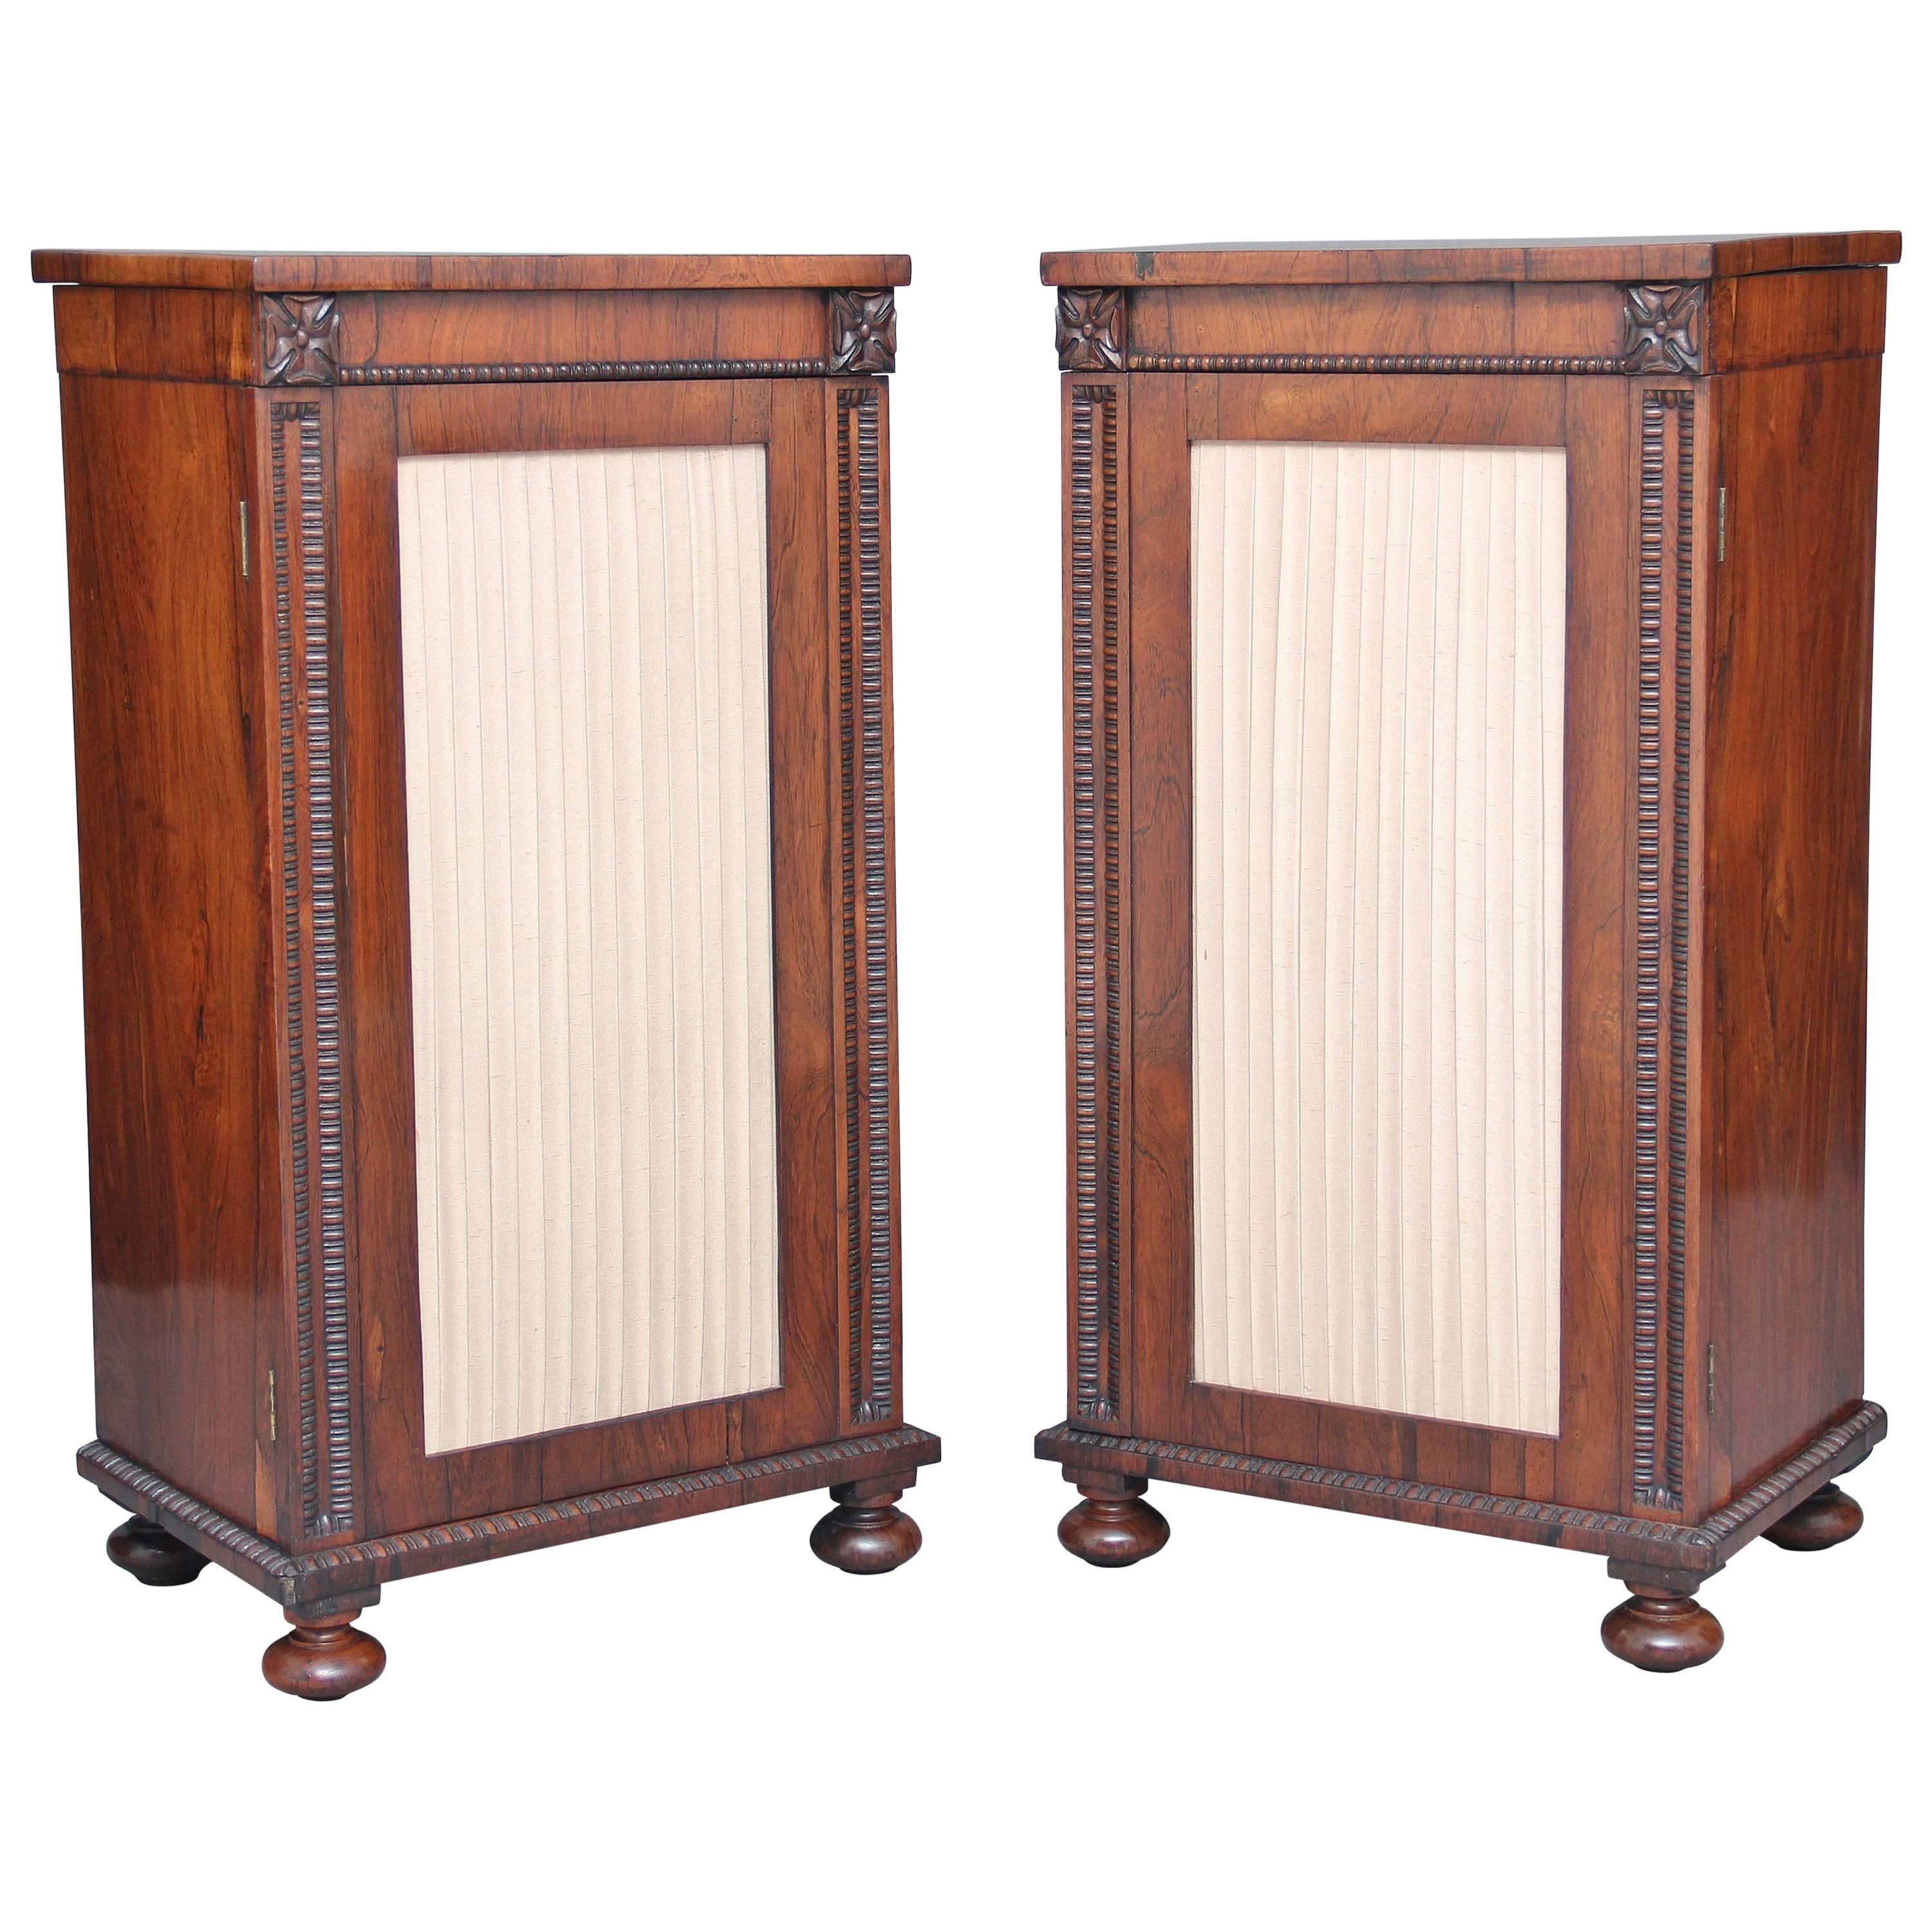 Pair of Early 19th Century Rosewood Pedestal Cabinets